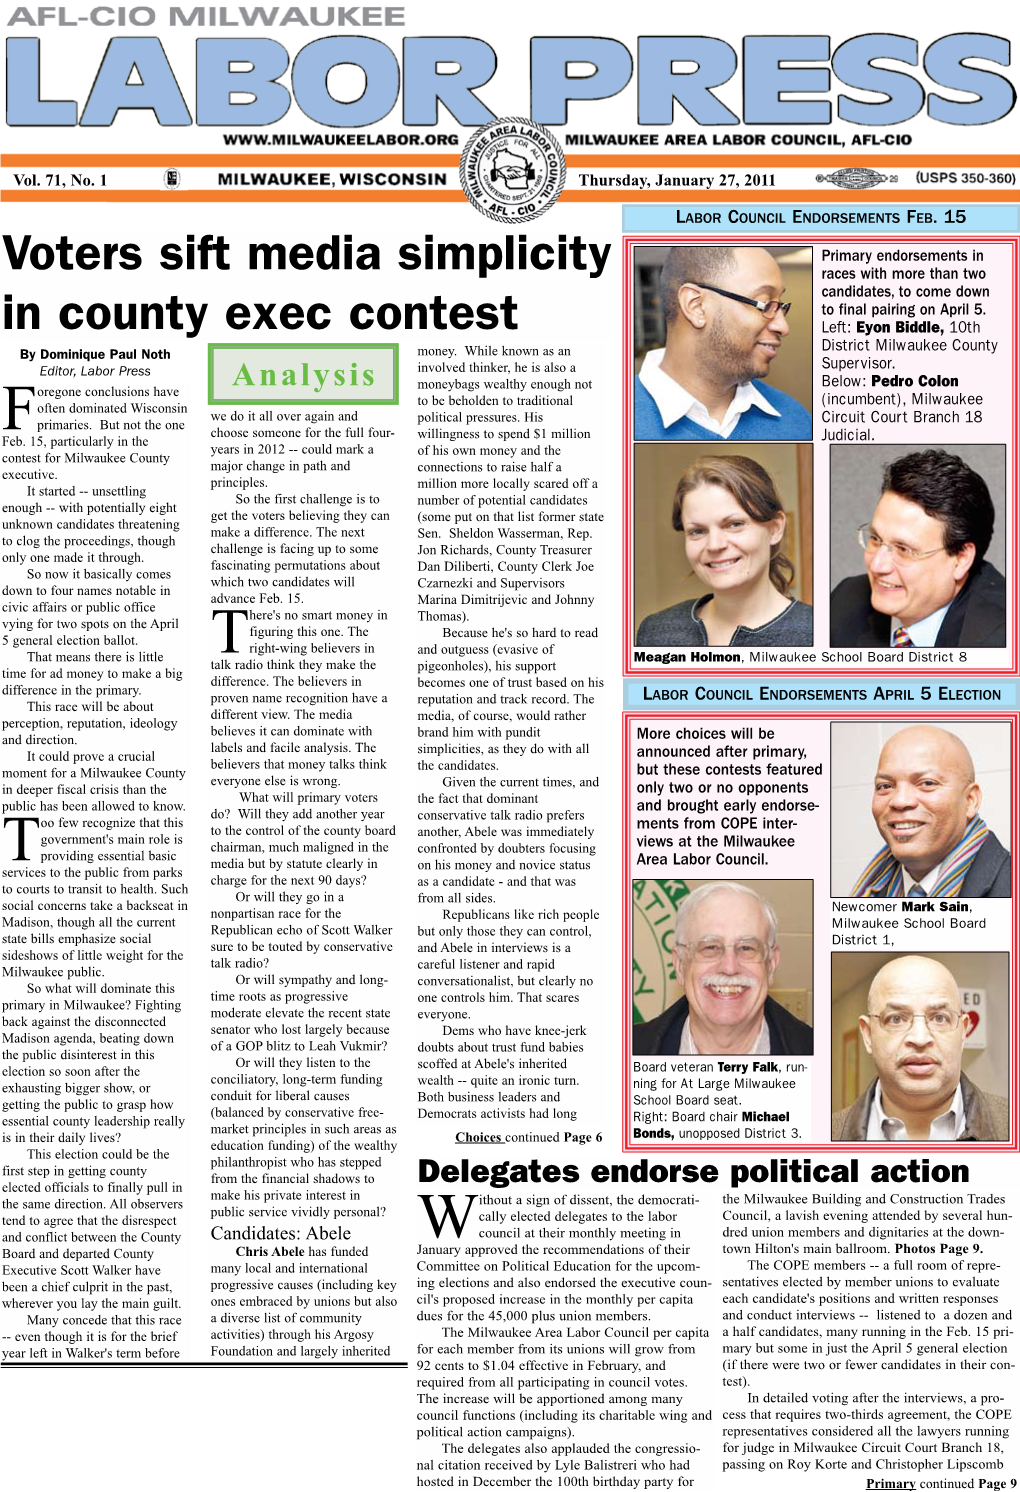 Voters Sift Media Simplicity in County Exec Contest